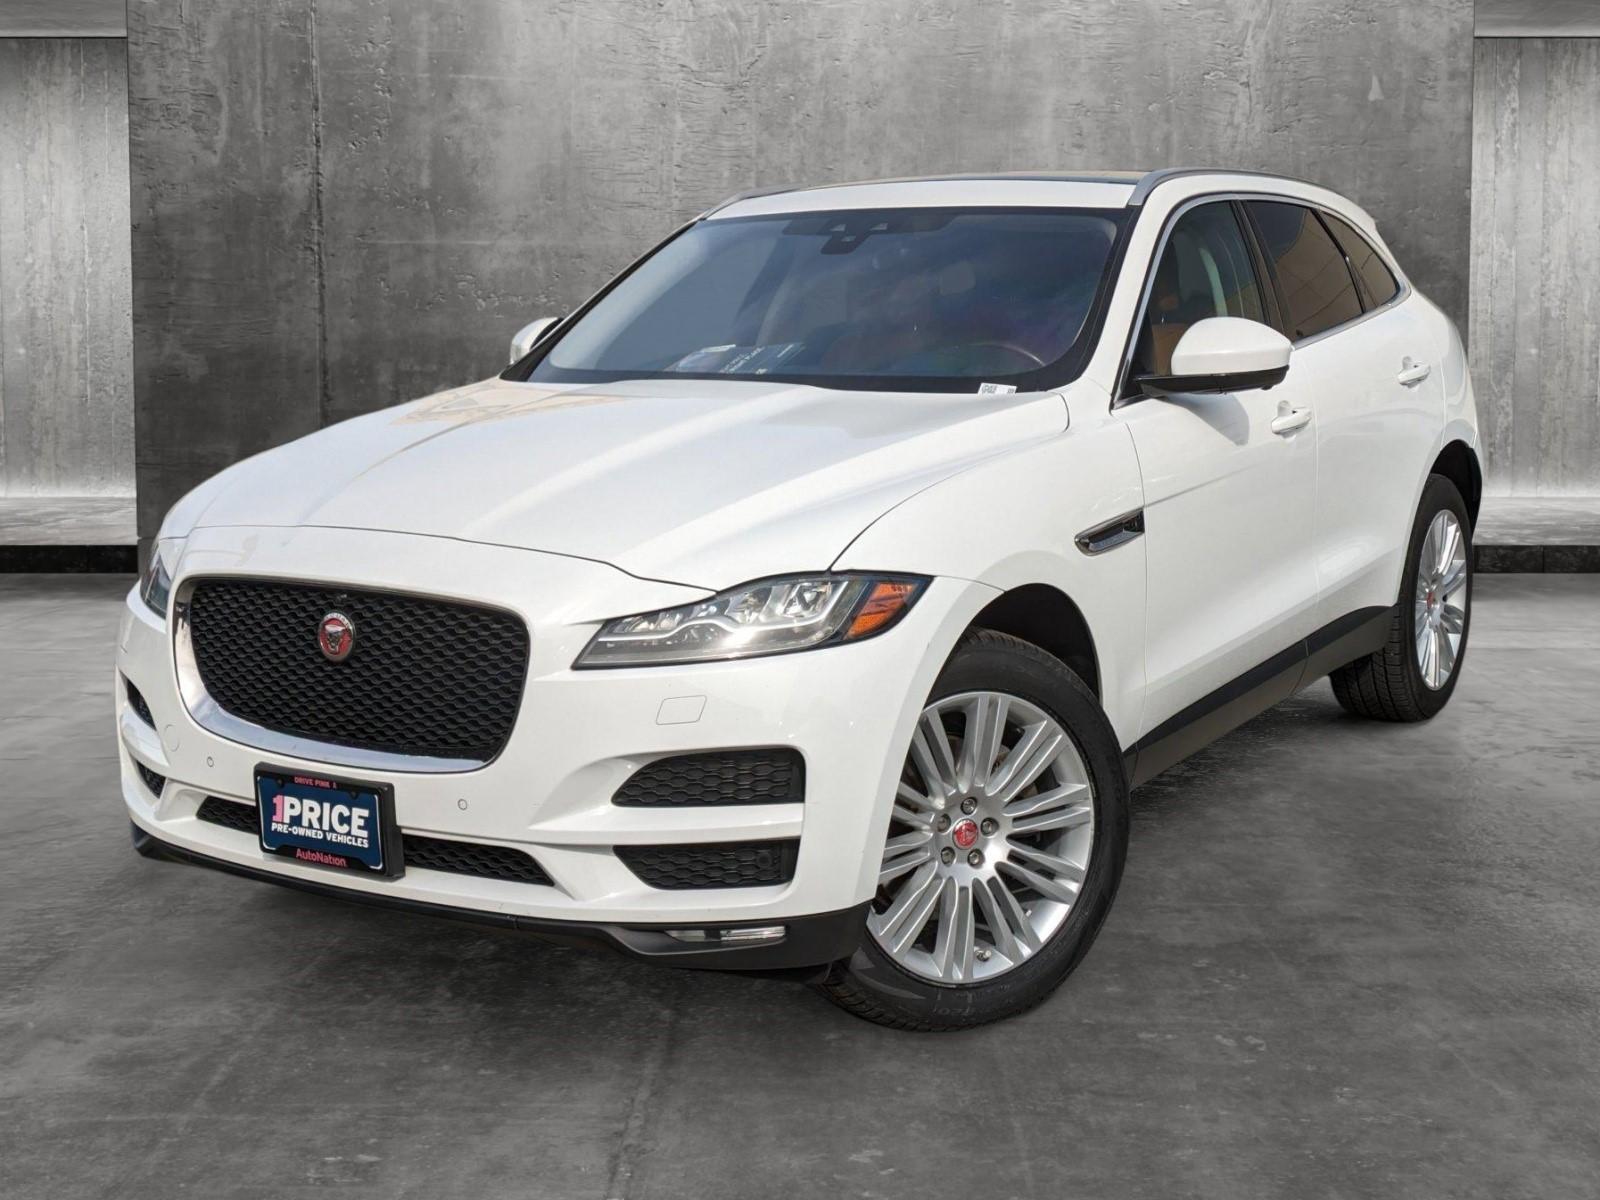 2019 Jaguar F-PACE Vehicle Photo in Bethesda, MD 20852